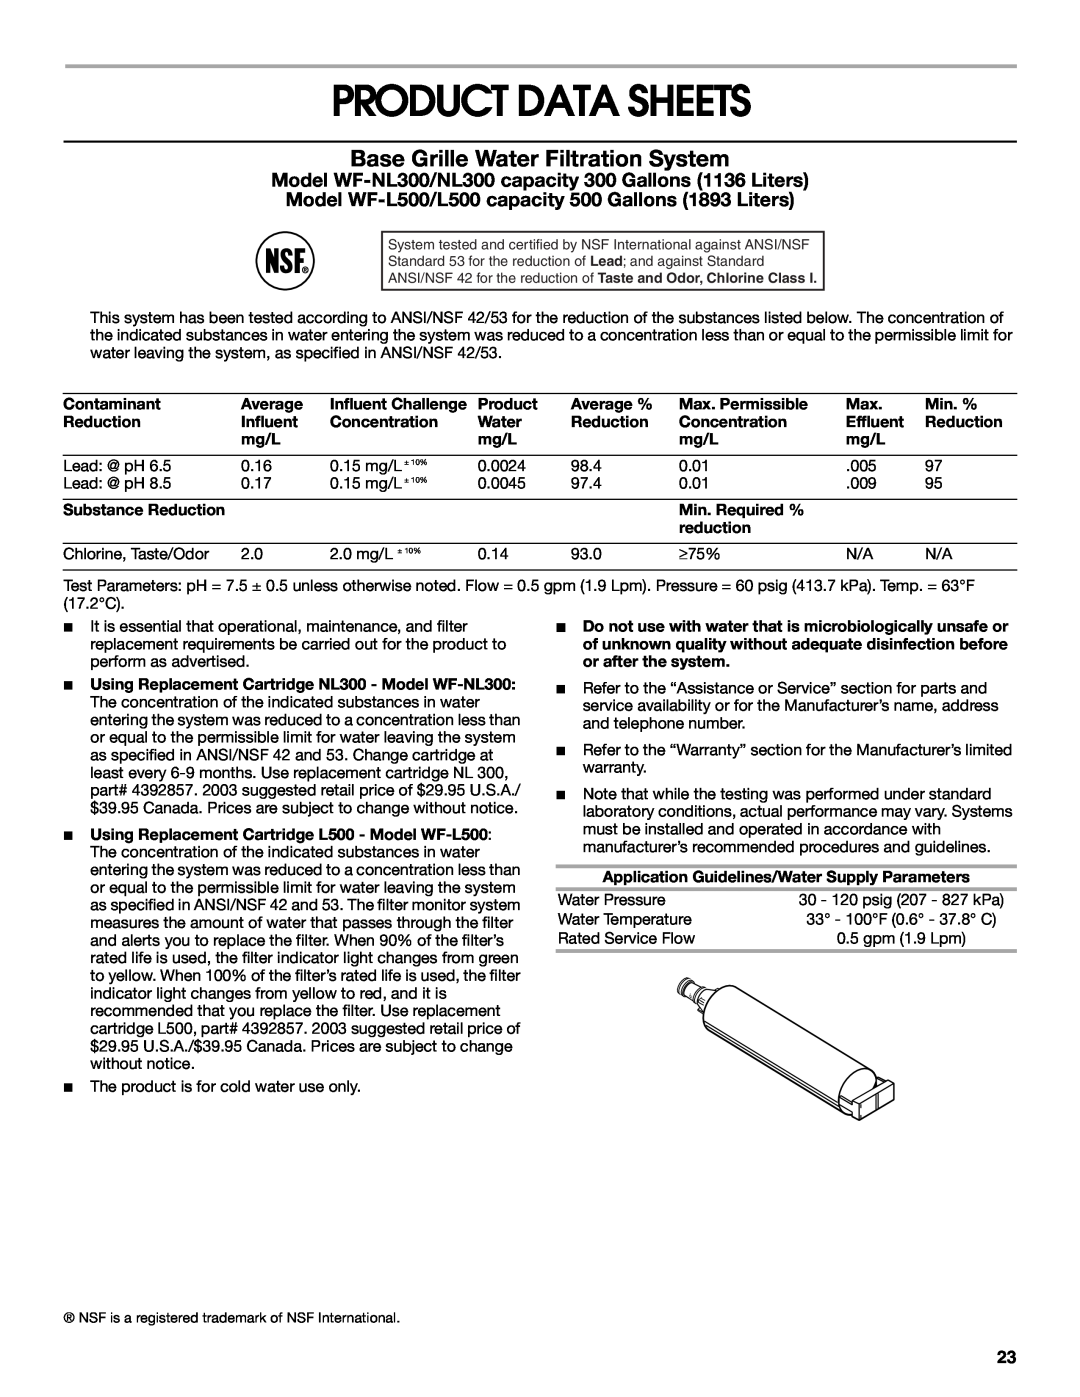 Whirlpool RS22AQXKQ02 manual Product Data Sheets, Base Grille Water Filtration System 